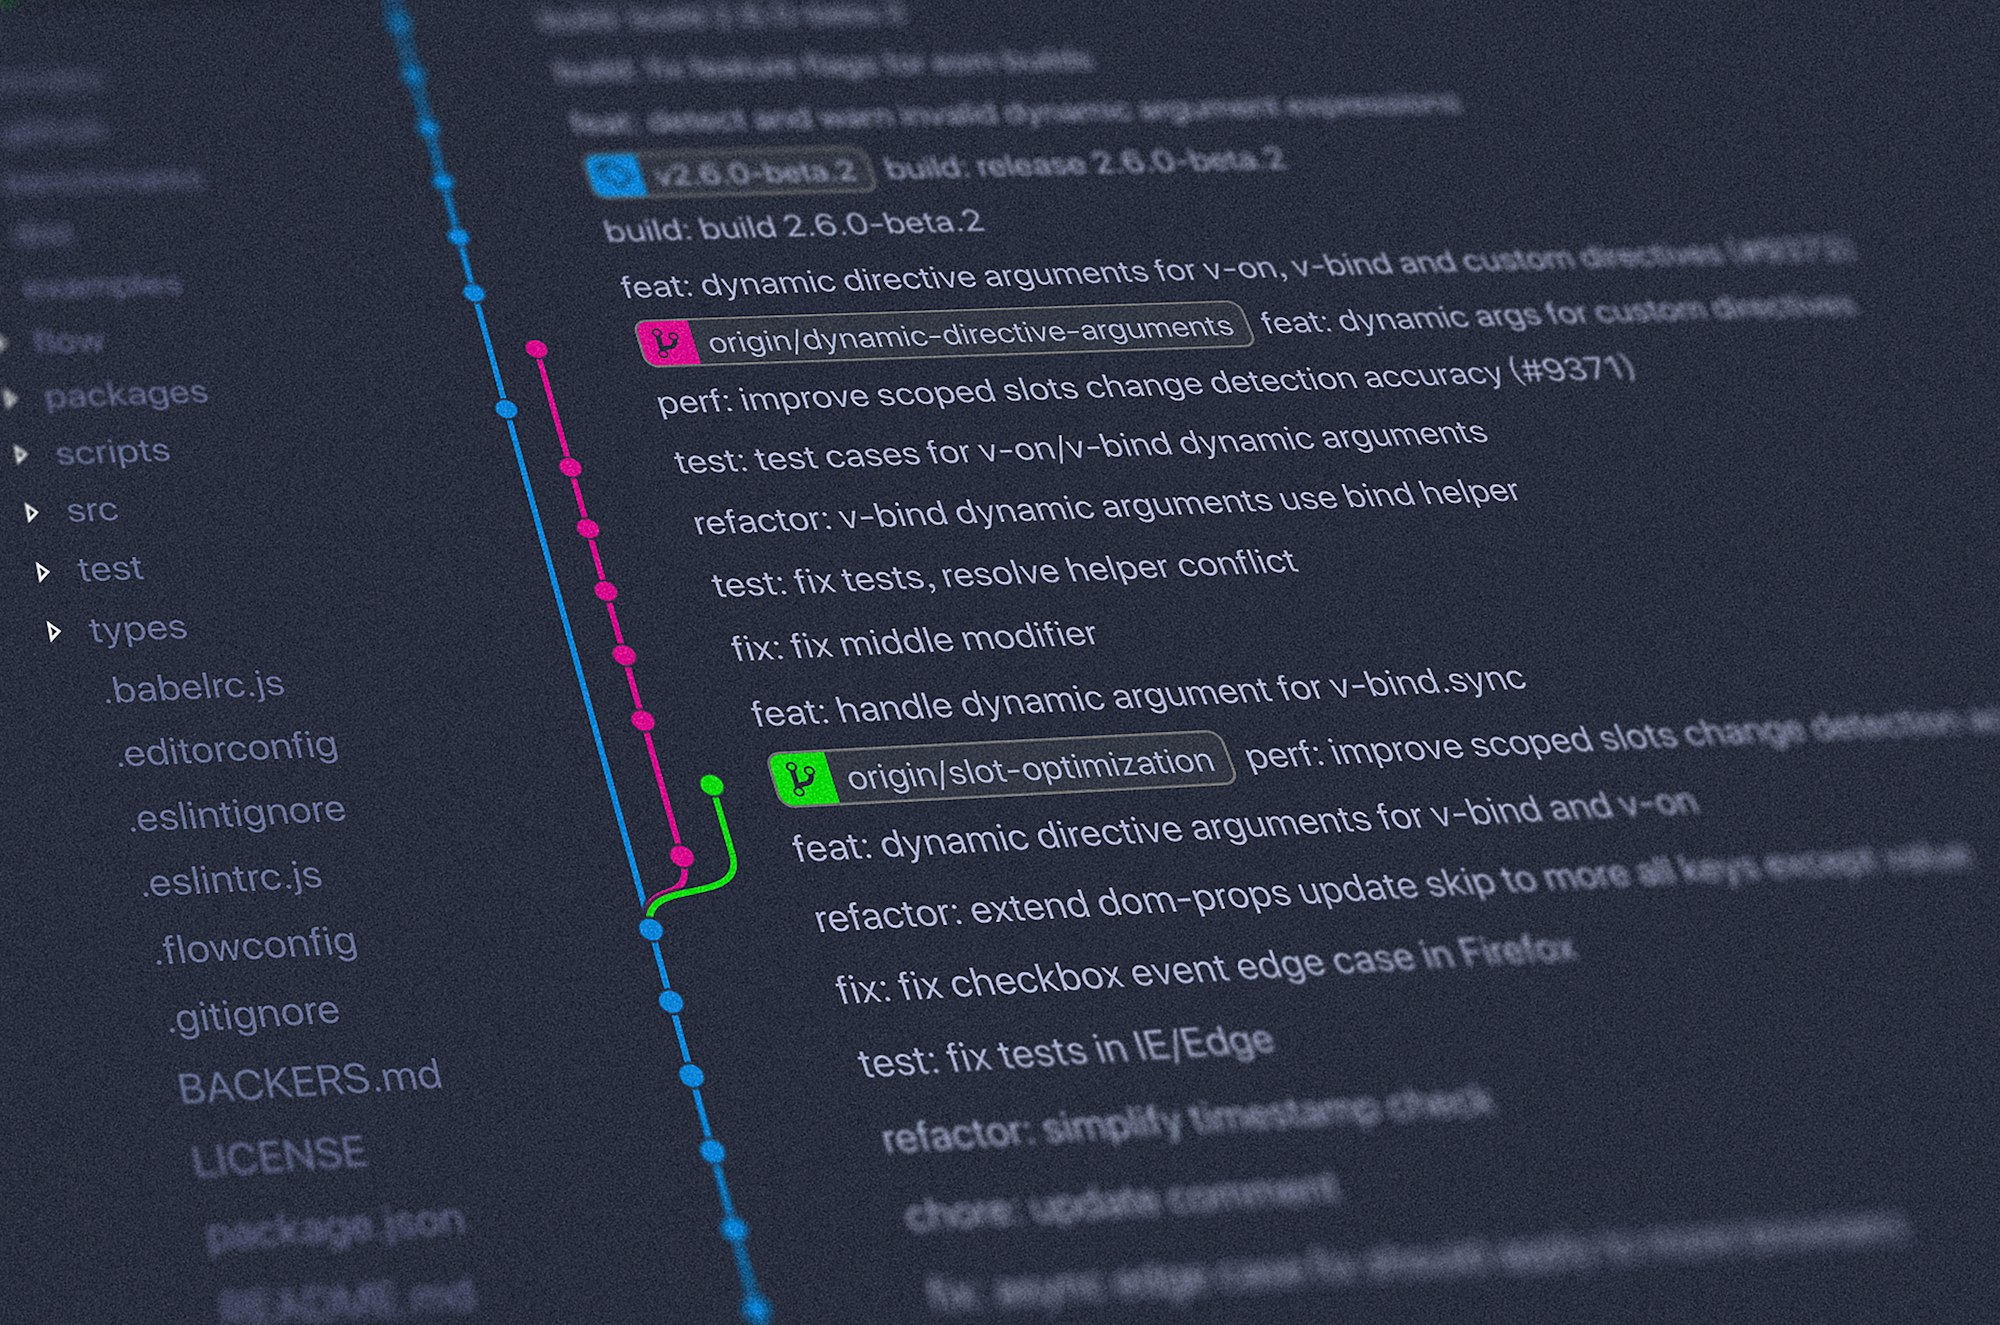 Awesome Git facts and tricks: Notes from the Pro Git book - Part I